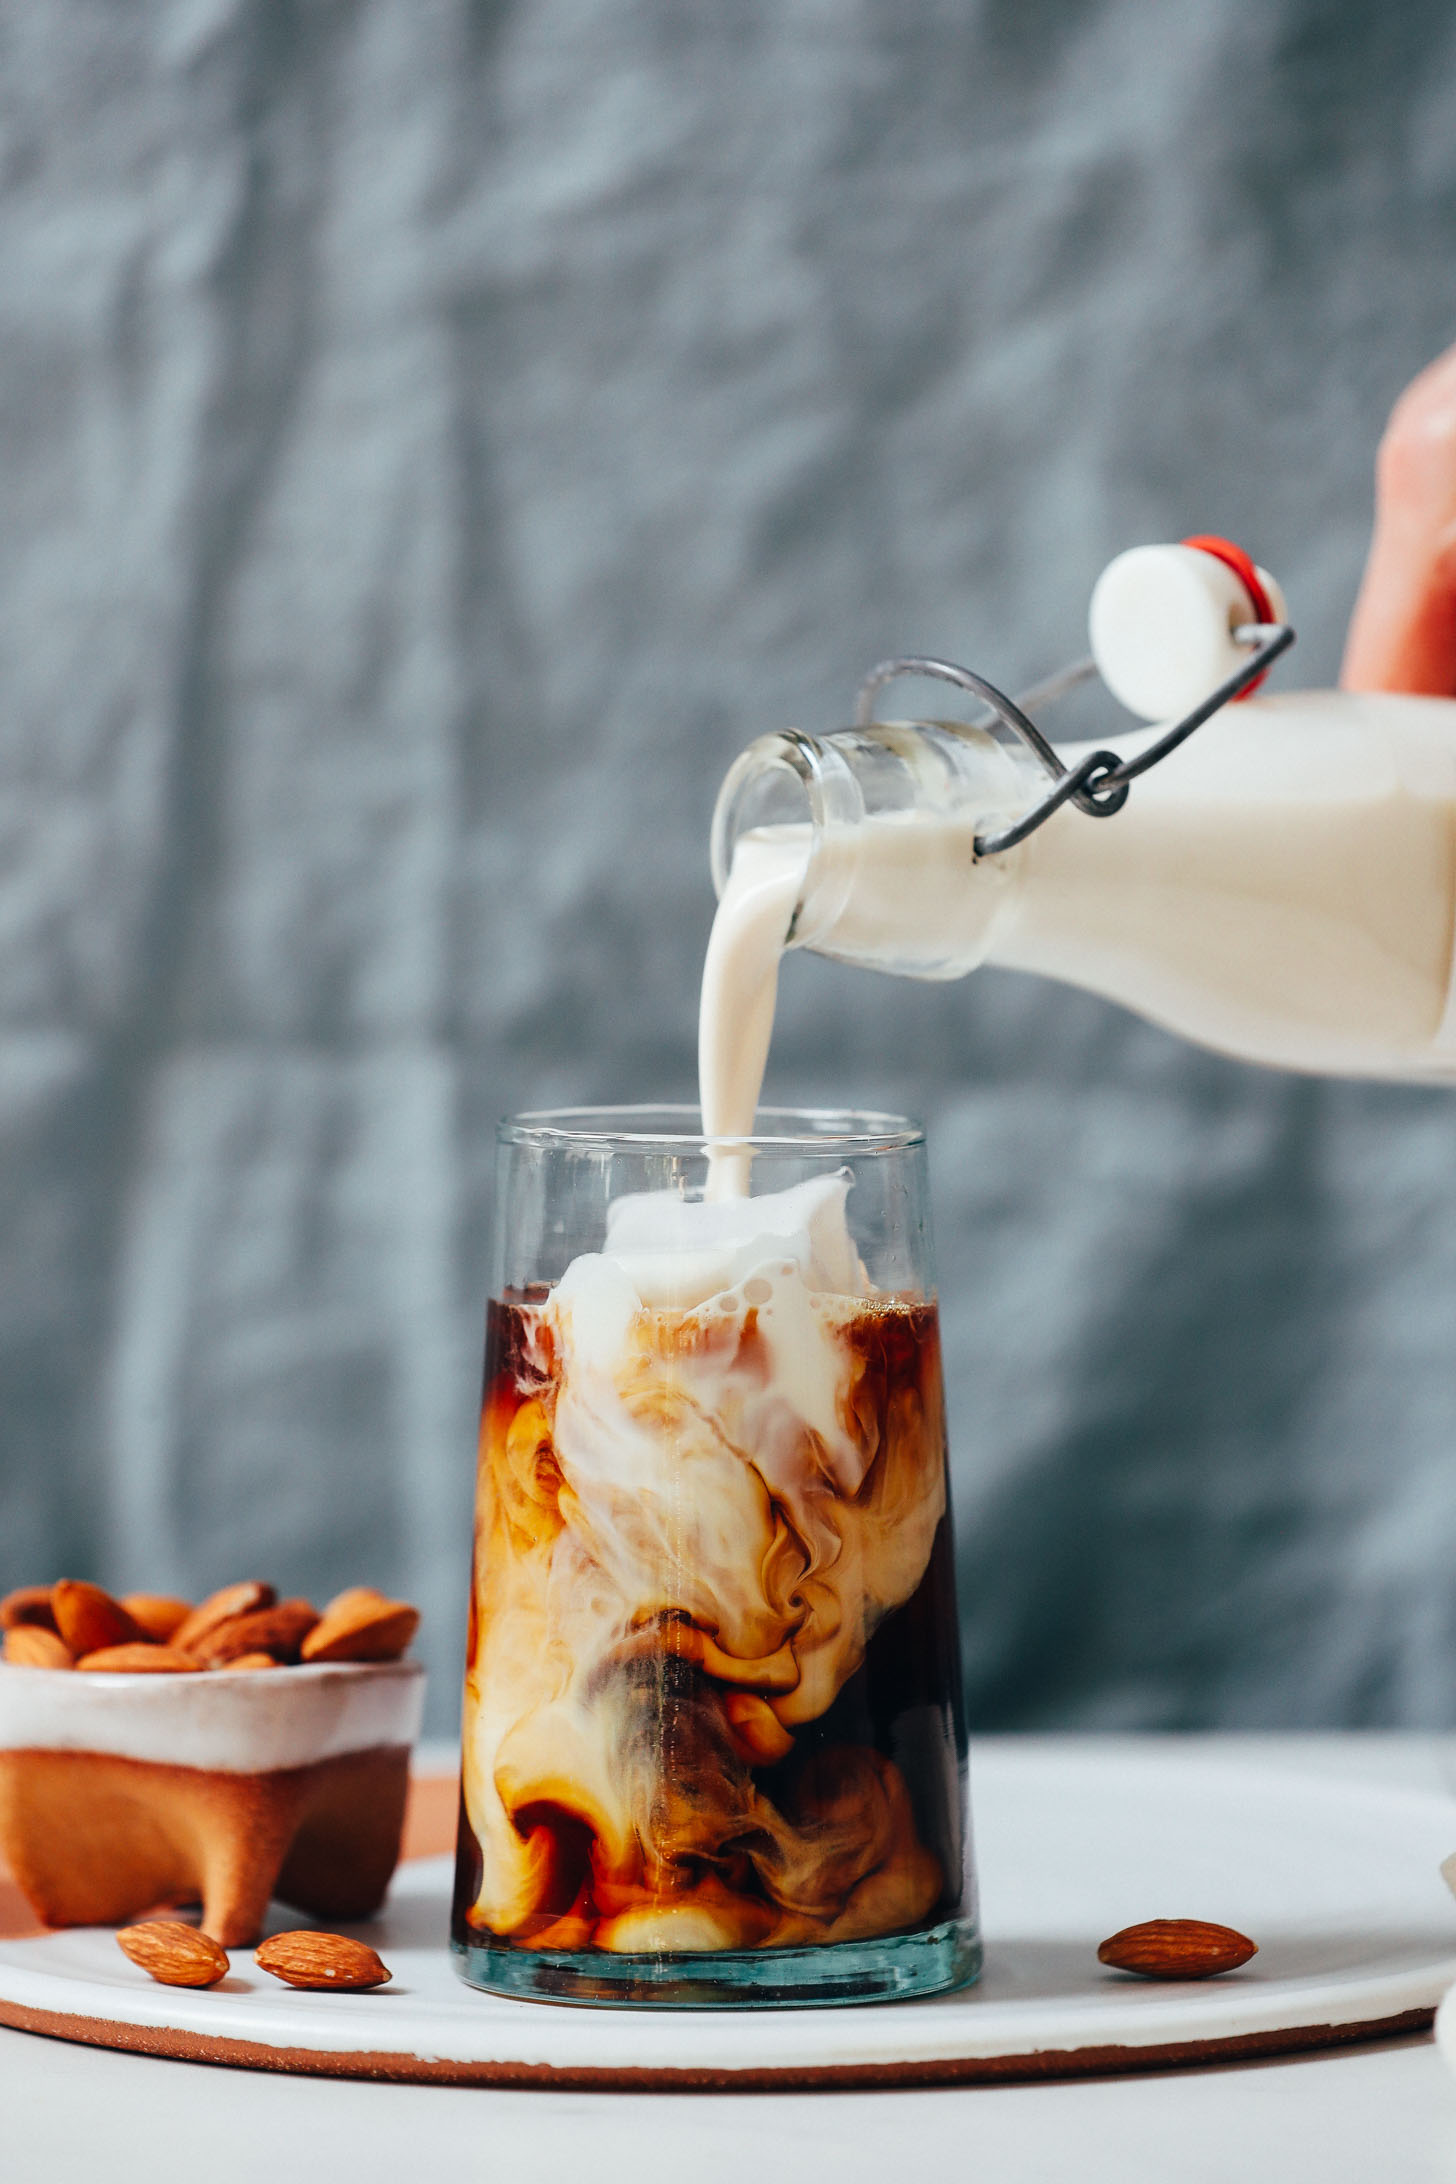 Pouring Almond Milk Coffee Creamer into a glass of iced coffee